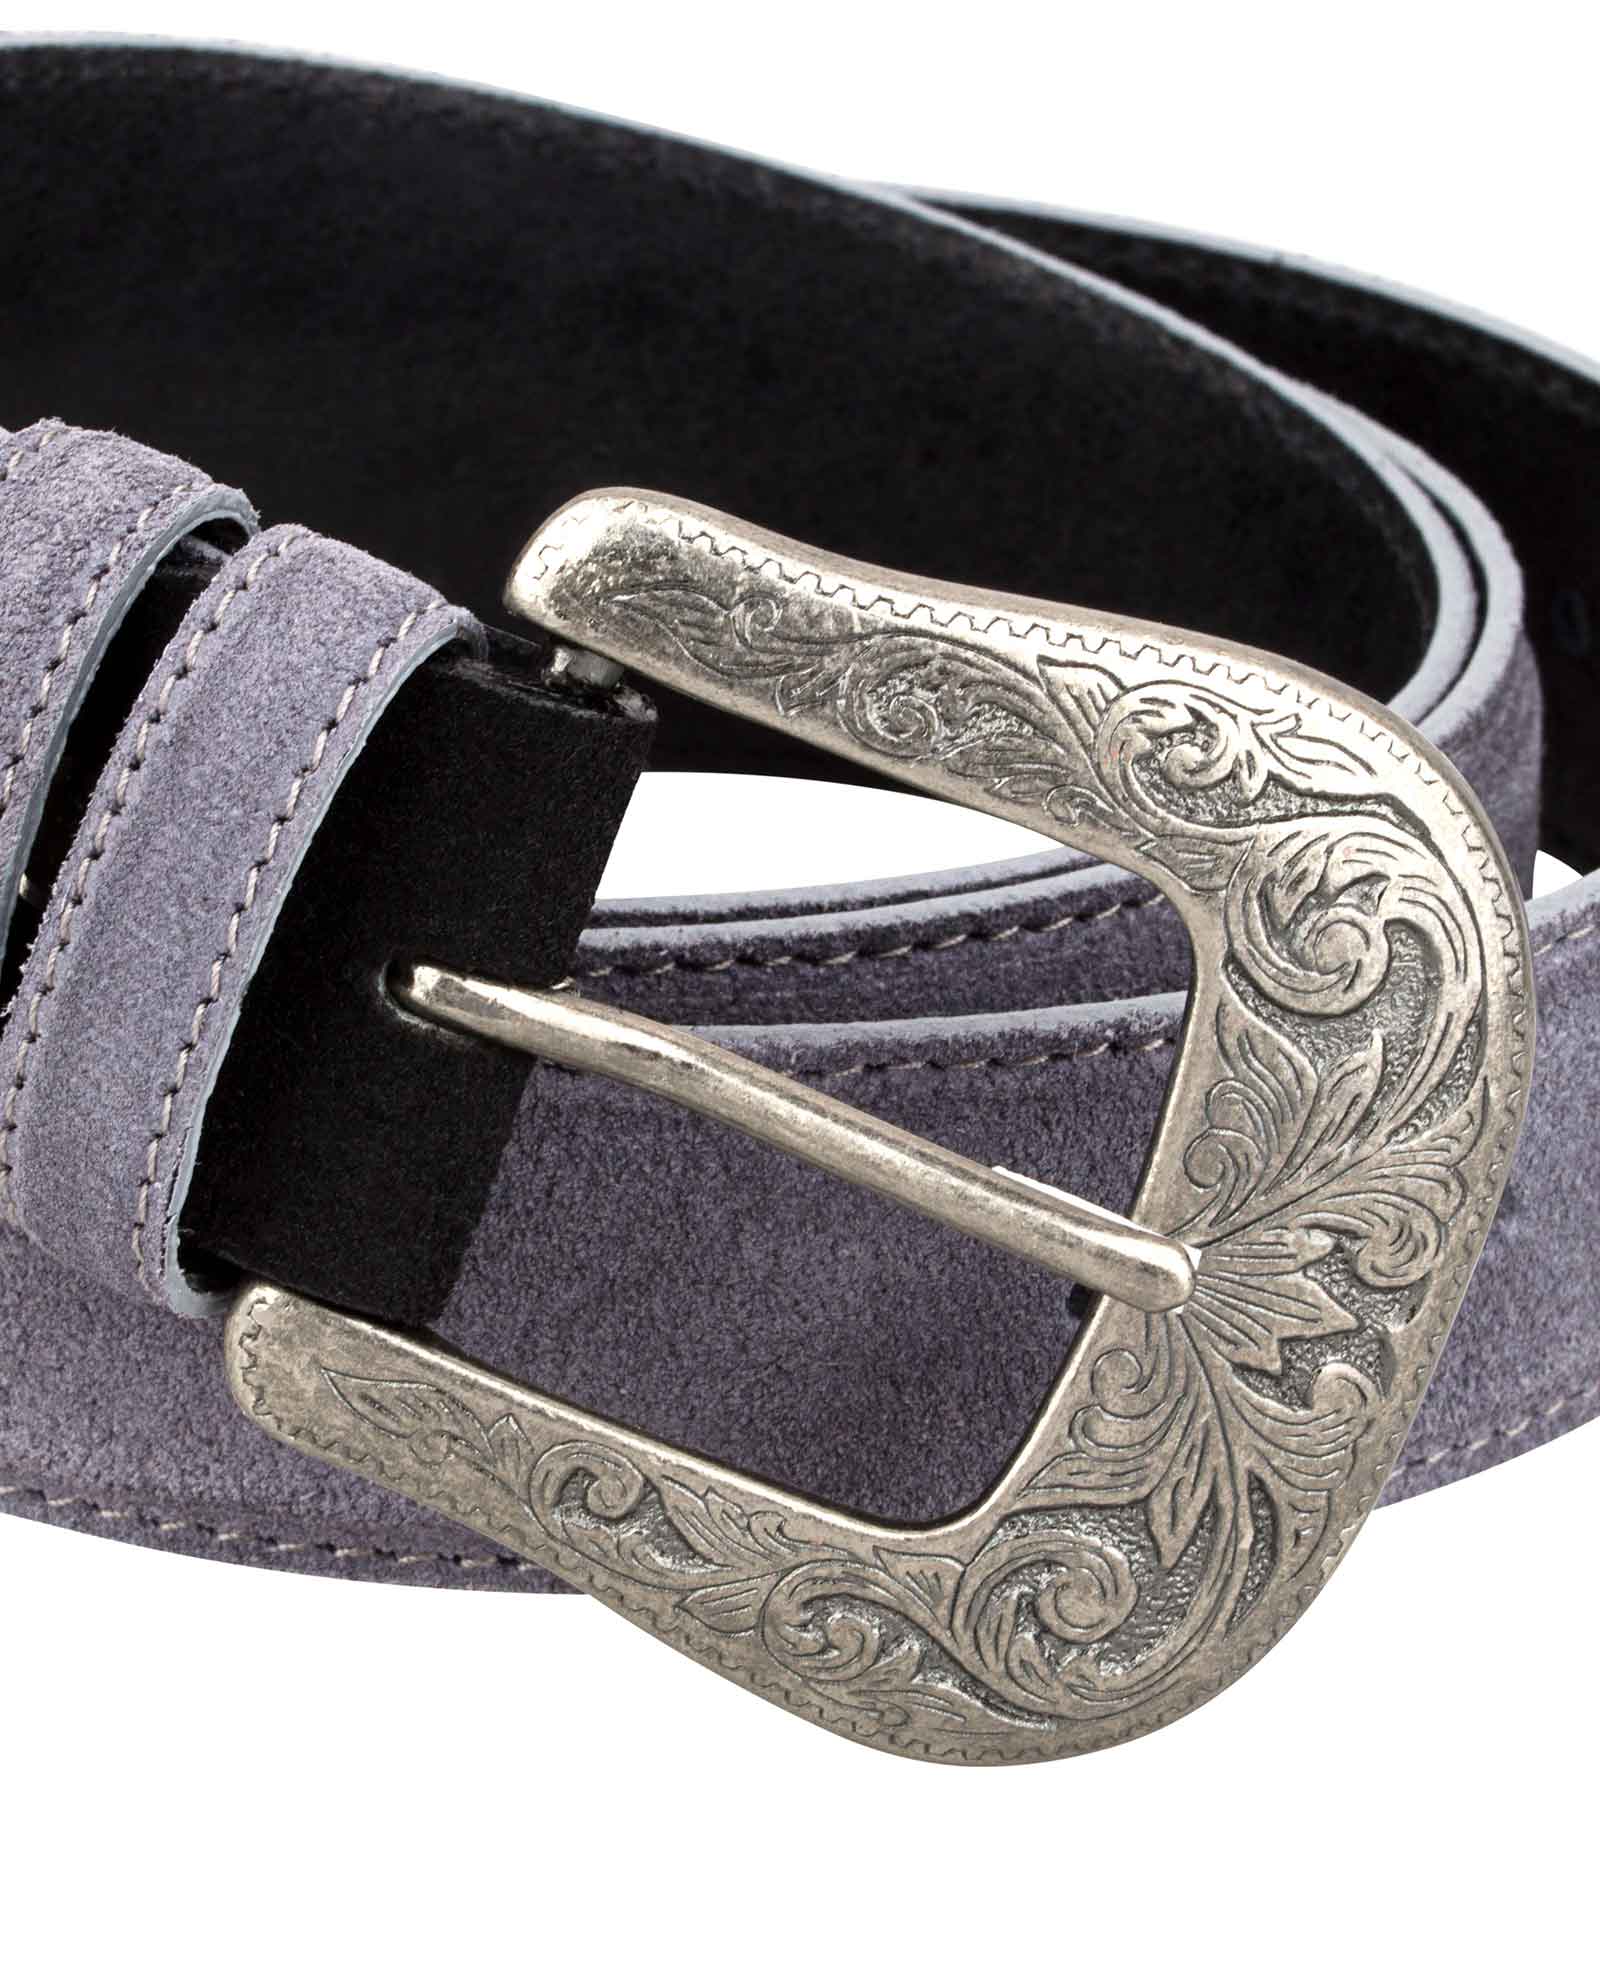 Buy Gray Suede Belt | Western buckle in Antique Silver | Free Shipping